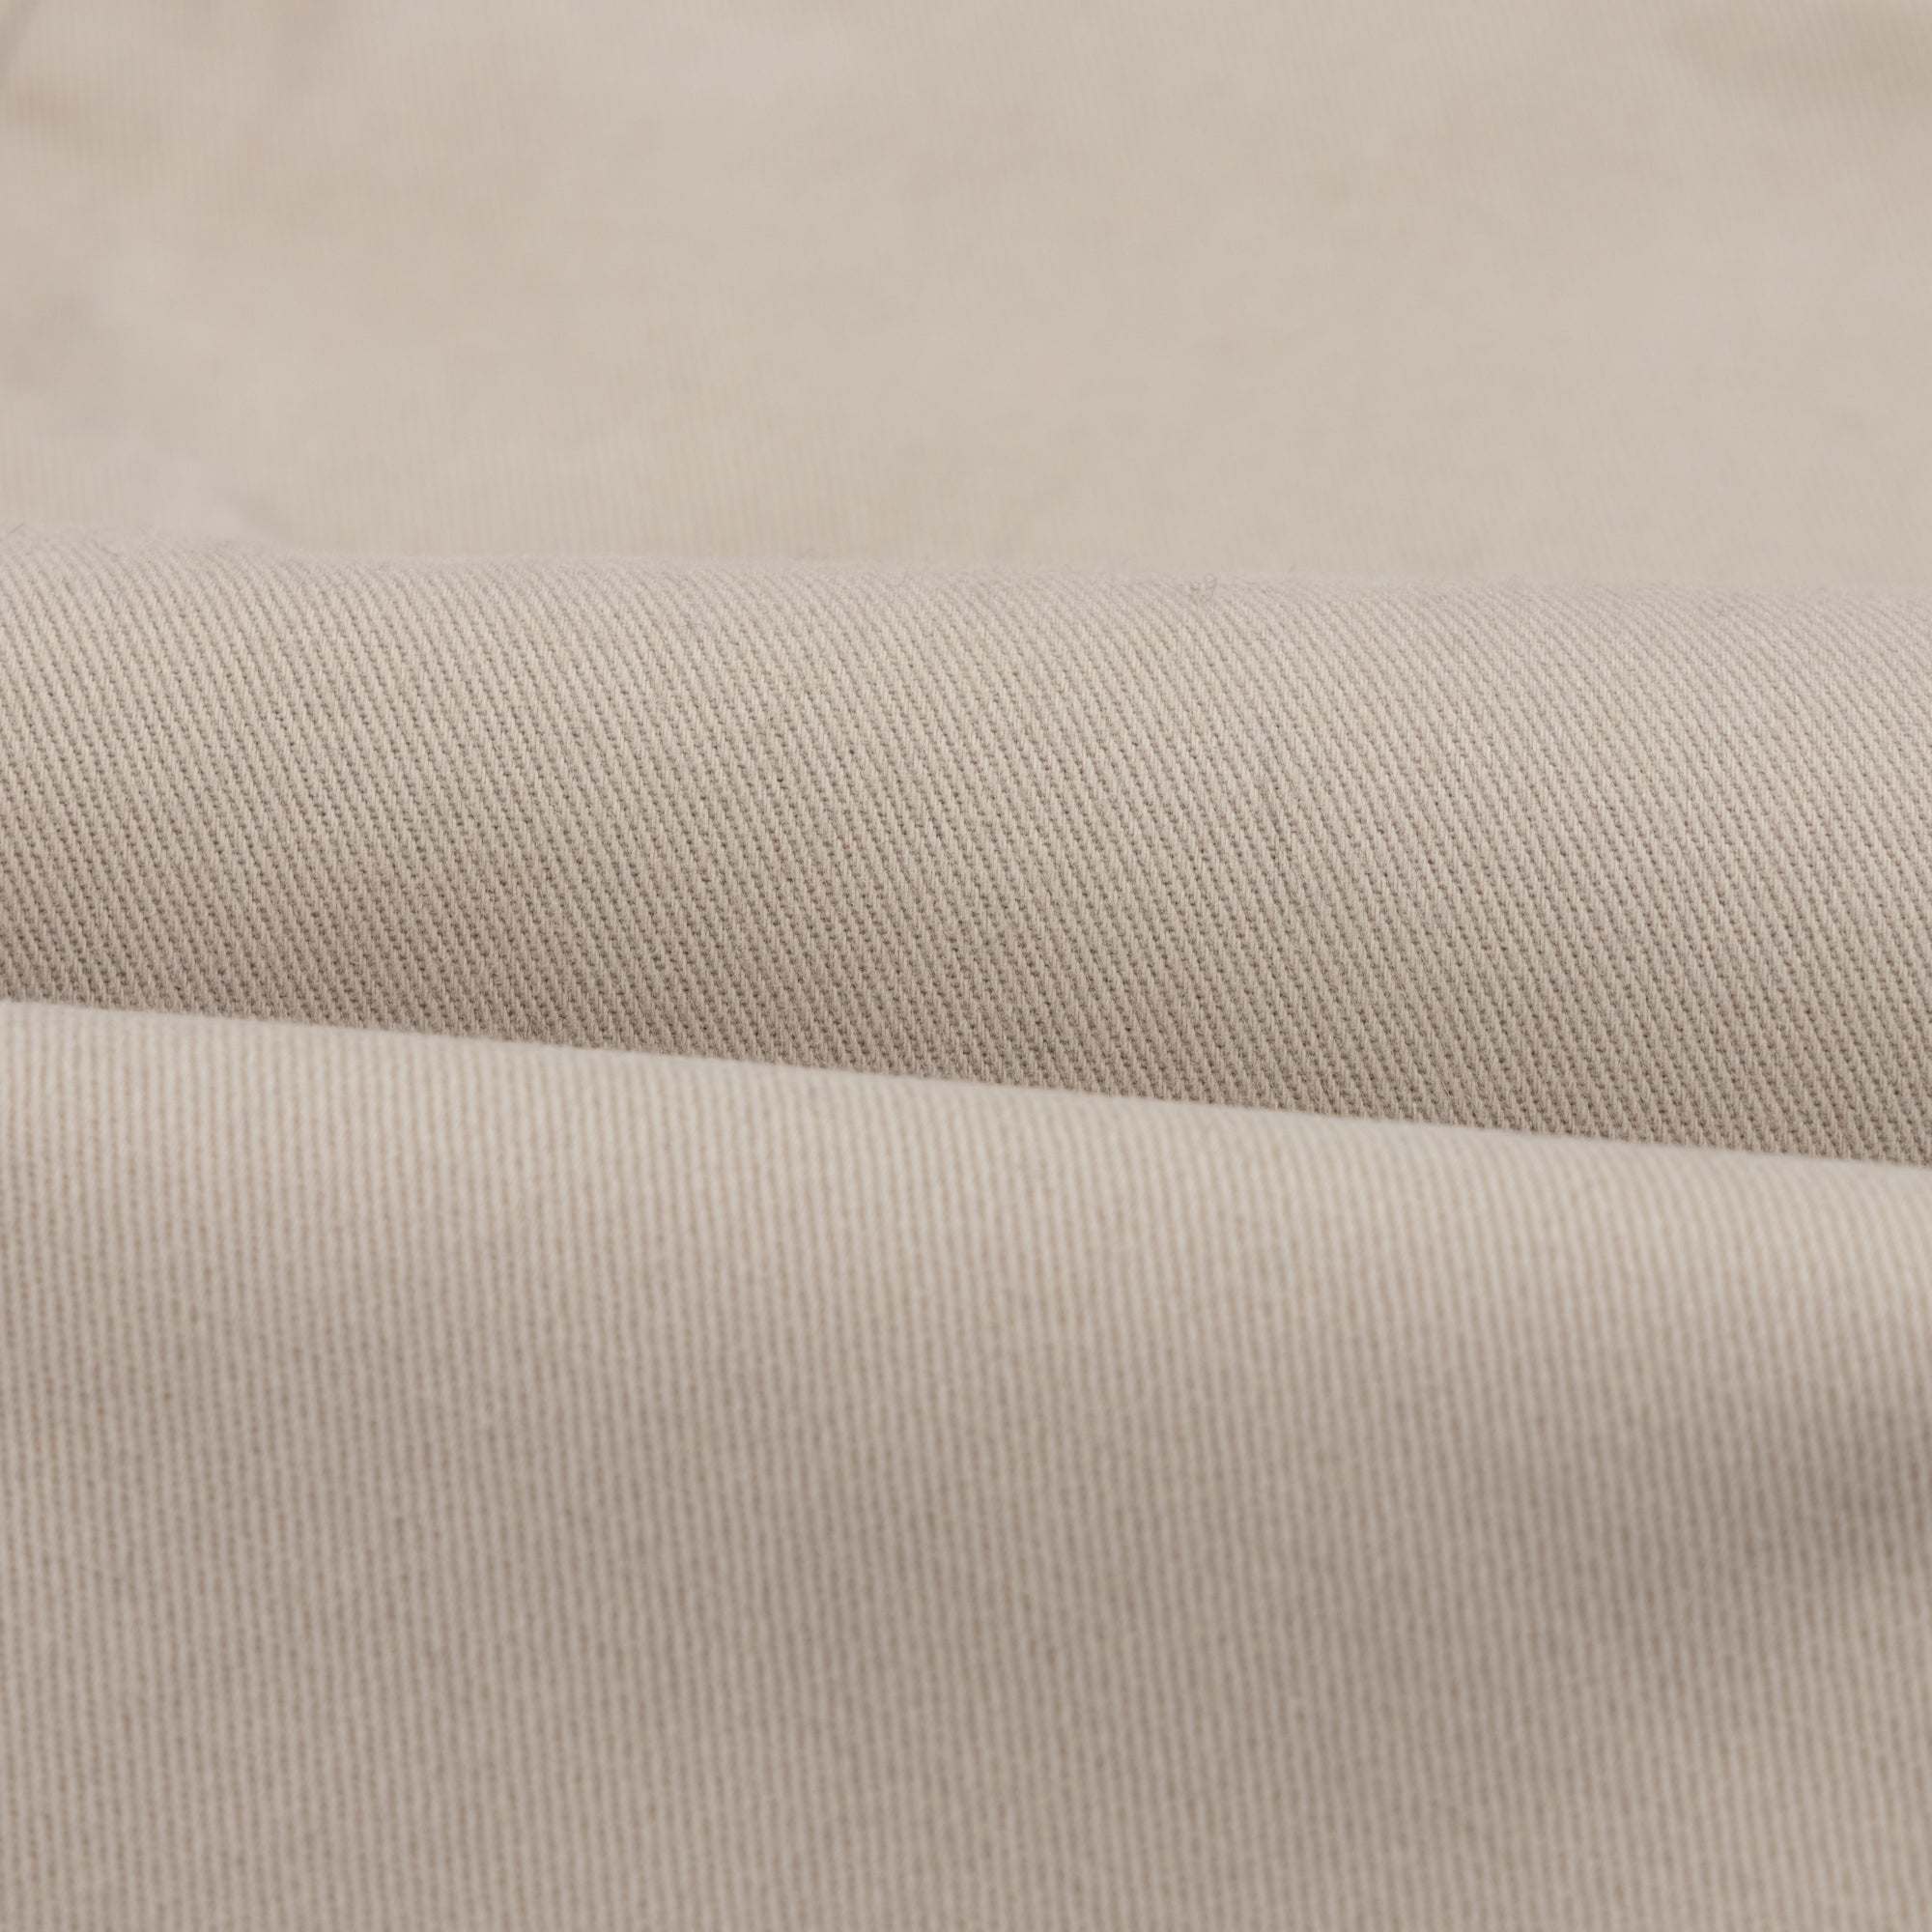 Flat Front Trouser - Stone Brushed Cotton